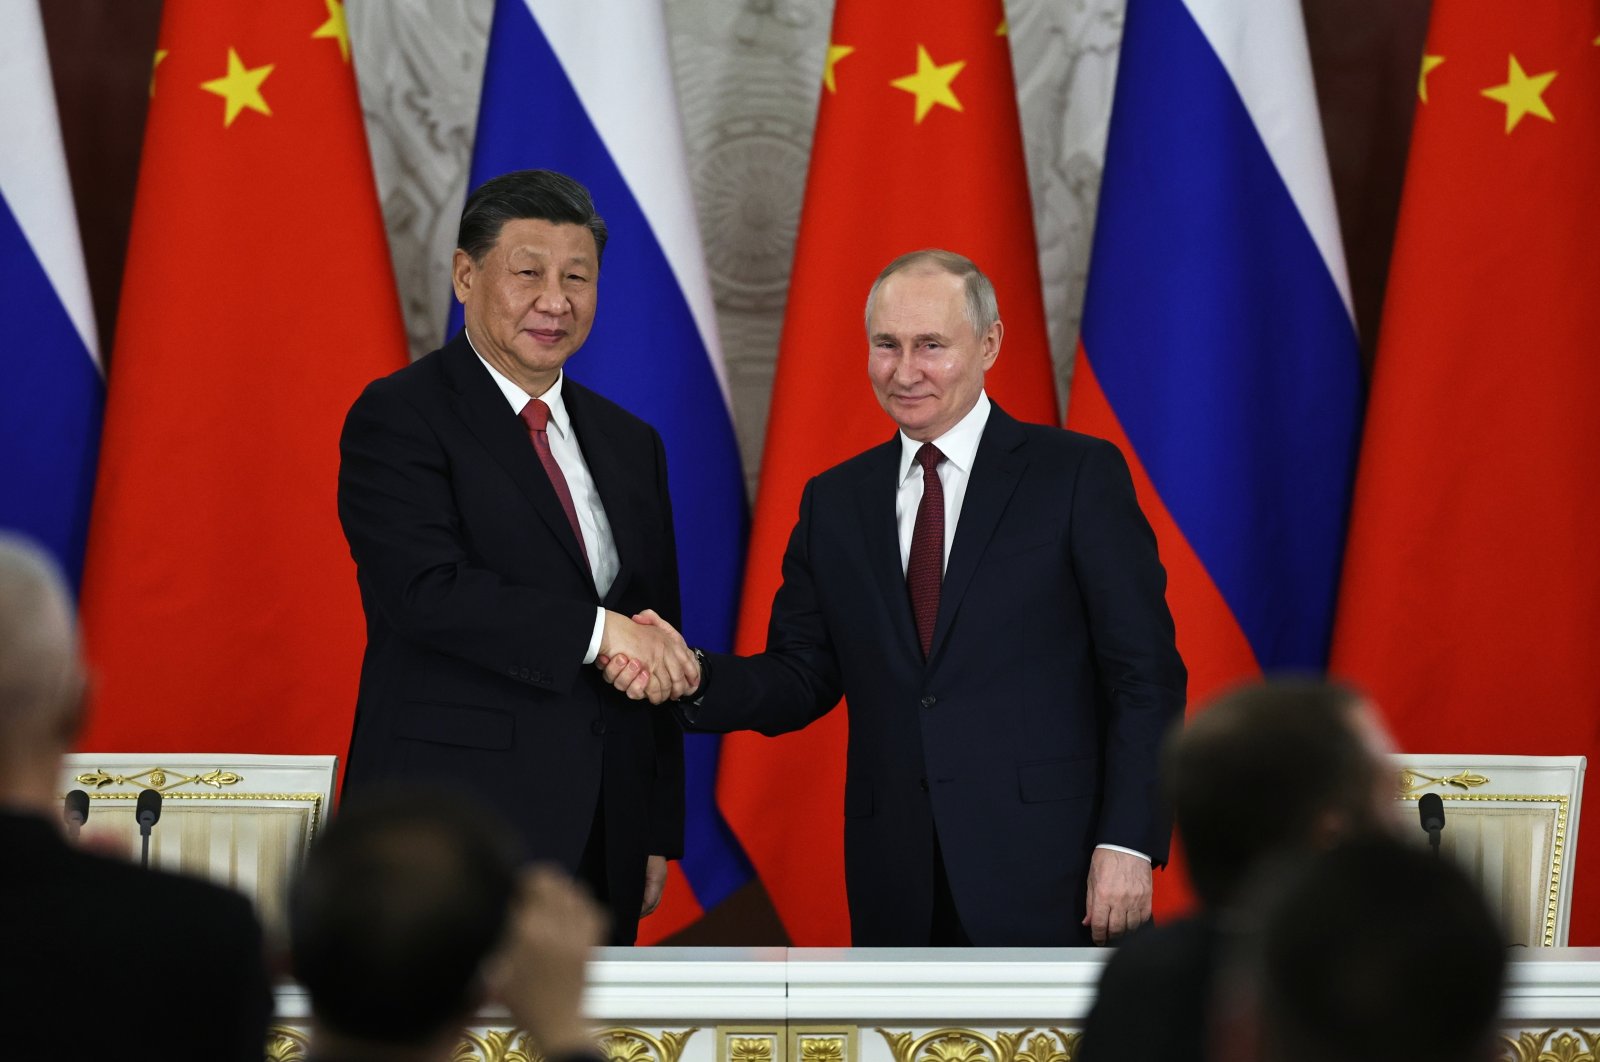 Russian President Vladimir Putin (R) and Chinese President Xi Jinping shake hands after speaking to the media during a signing ceremony following their talks at the Grand Kremlin Palace, Moscow, Russia, March 21, 2023. (AP Photo)